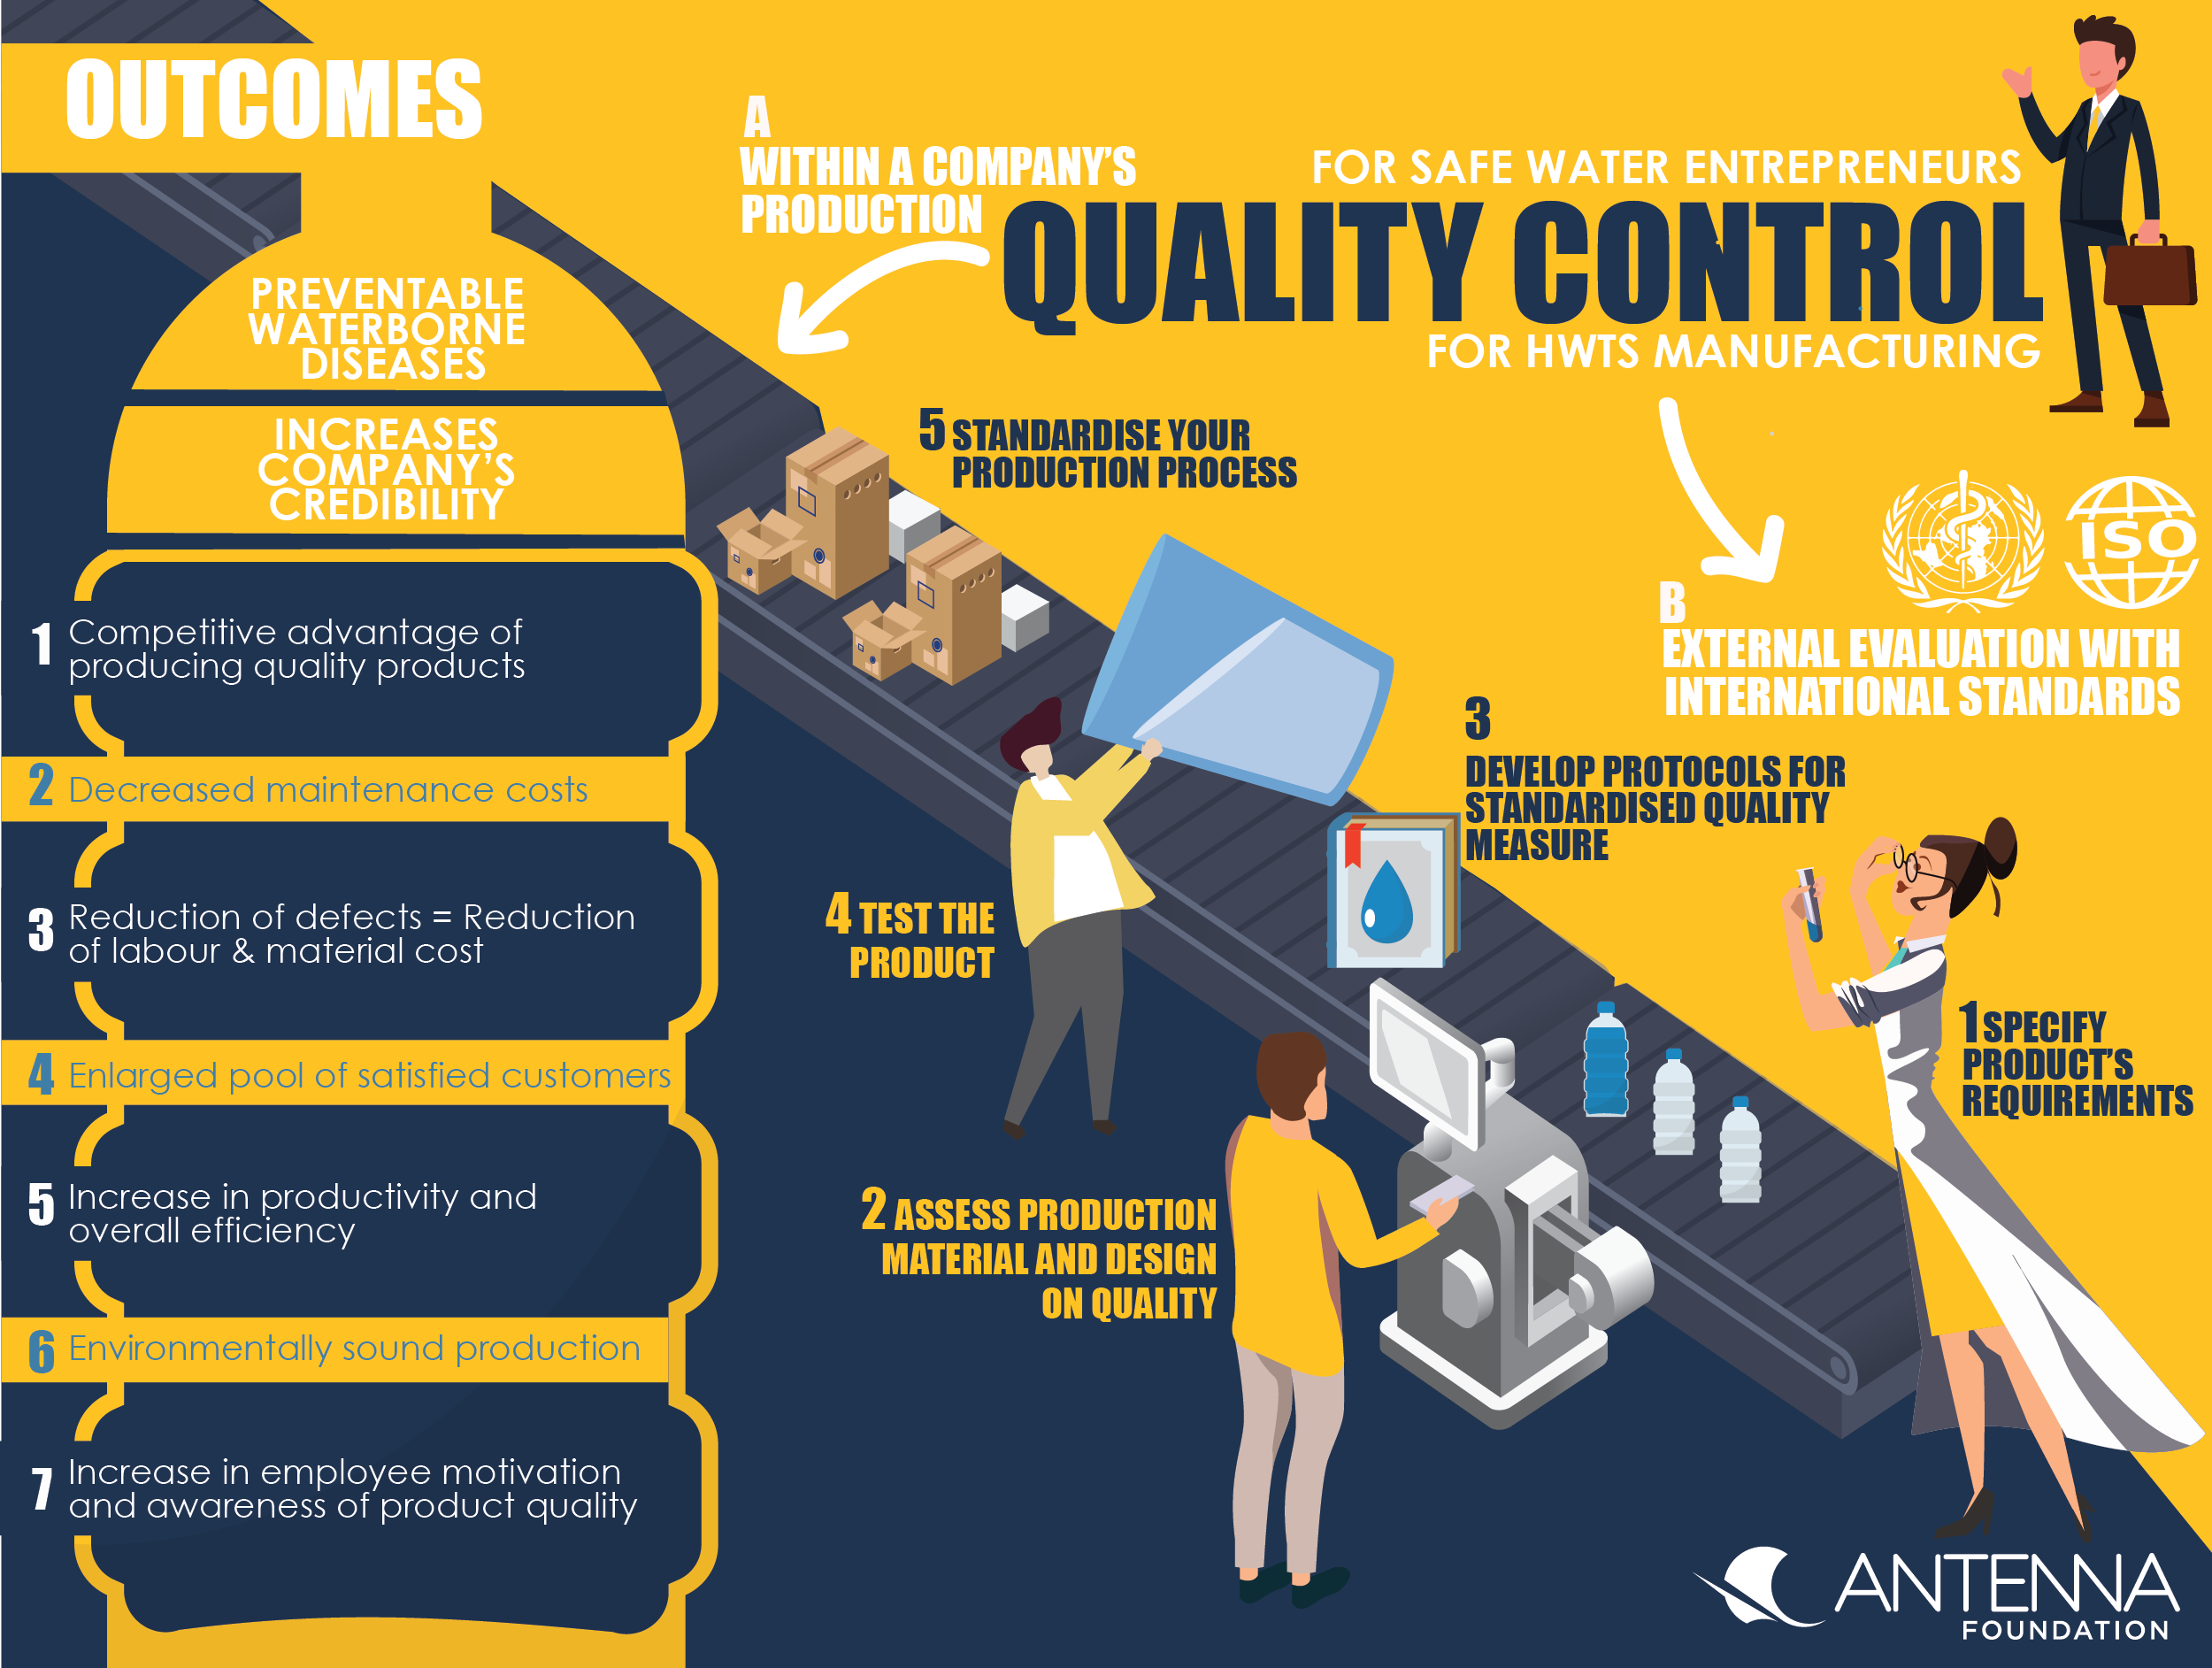  A diagram illustrating the outcomes of quality control processes within a company. The outcomes include increased company credibility, reduced maintenance costs, reduction of defects, increased customer satisfaction, increased productivity, environmentally sound production, and increased employee motivation.